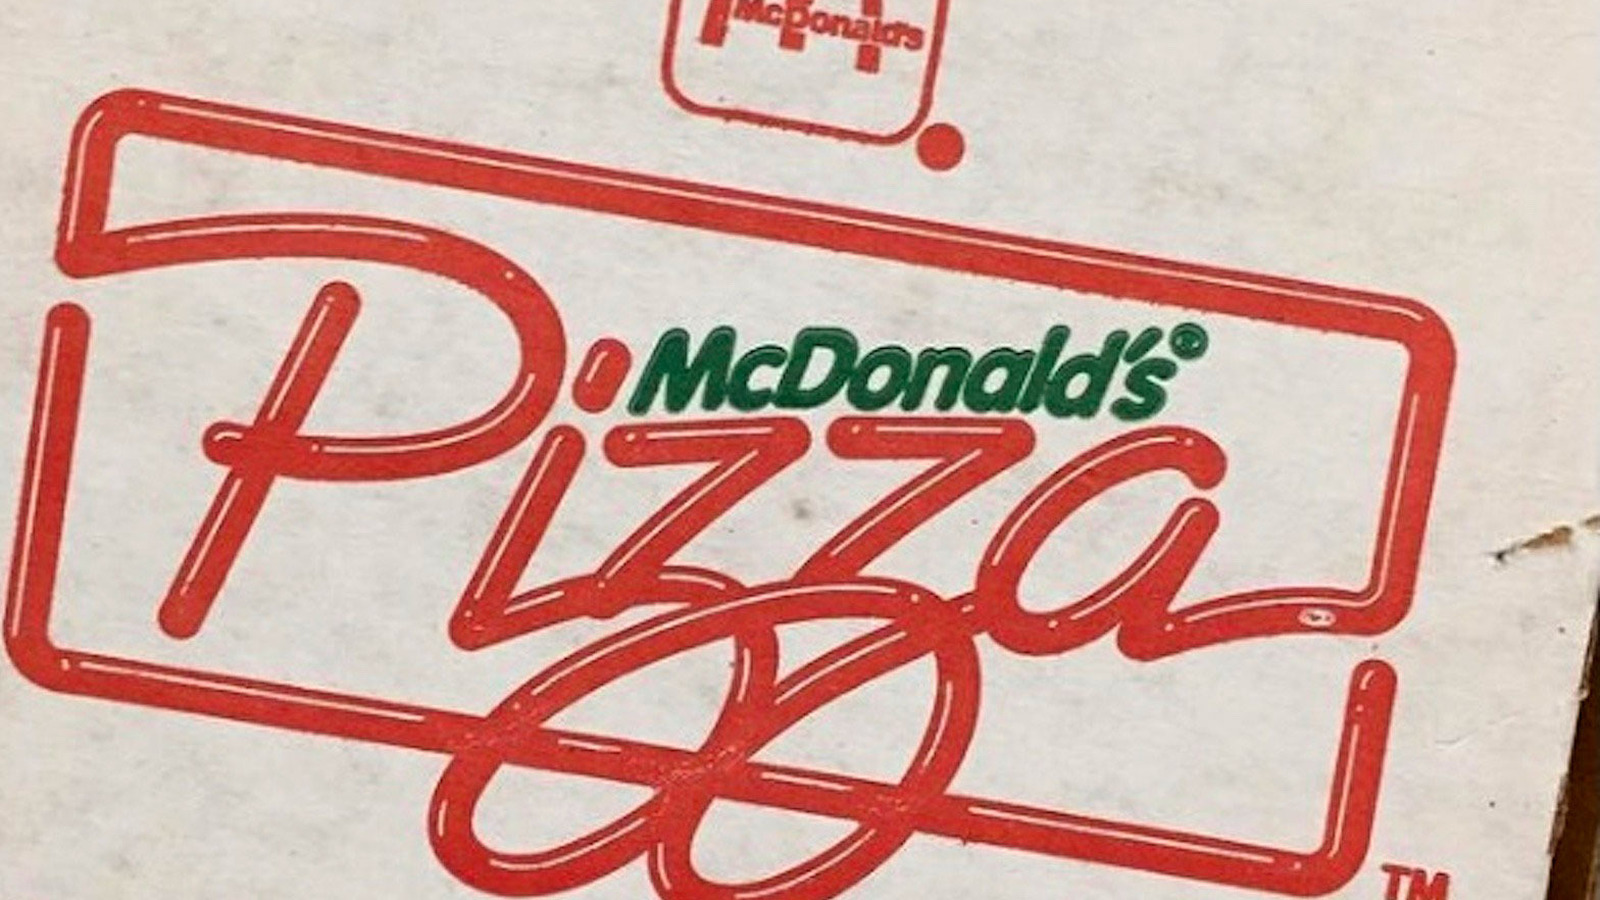 Popular McDonald's discontinued item from the 90s is making a